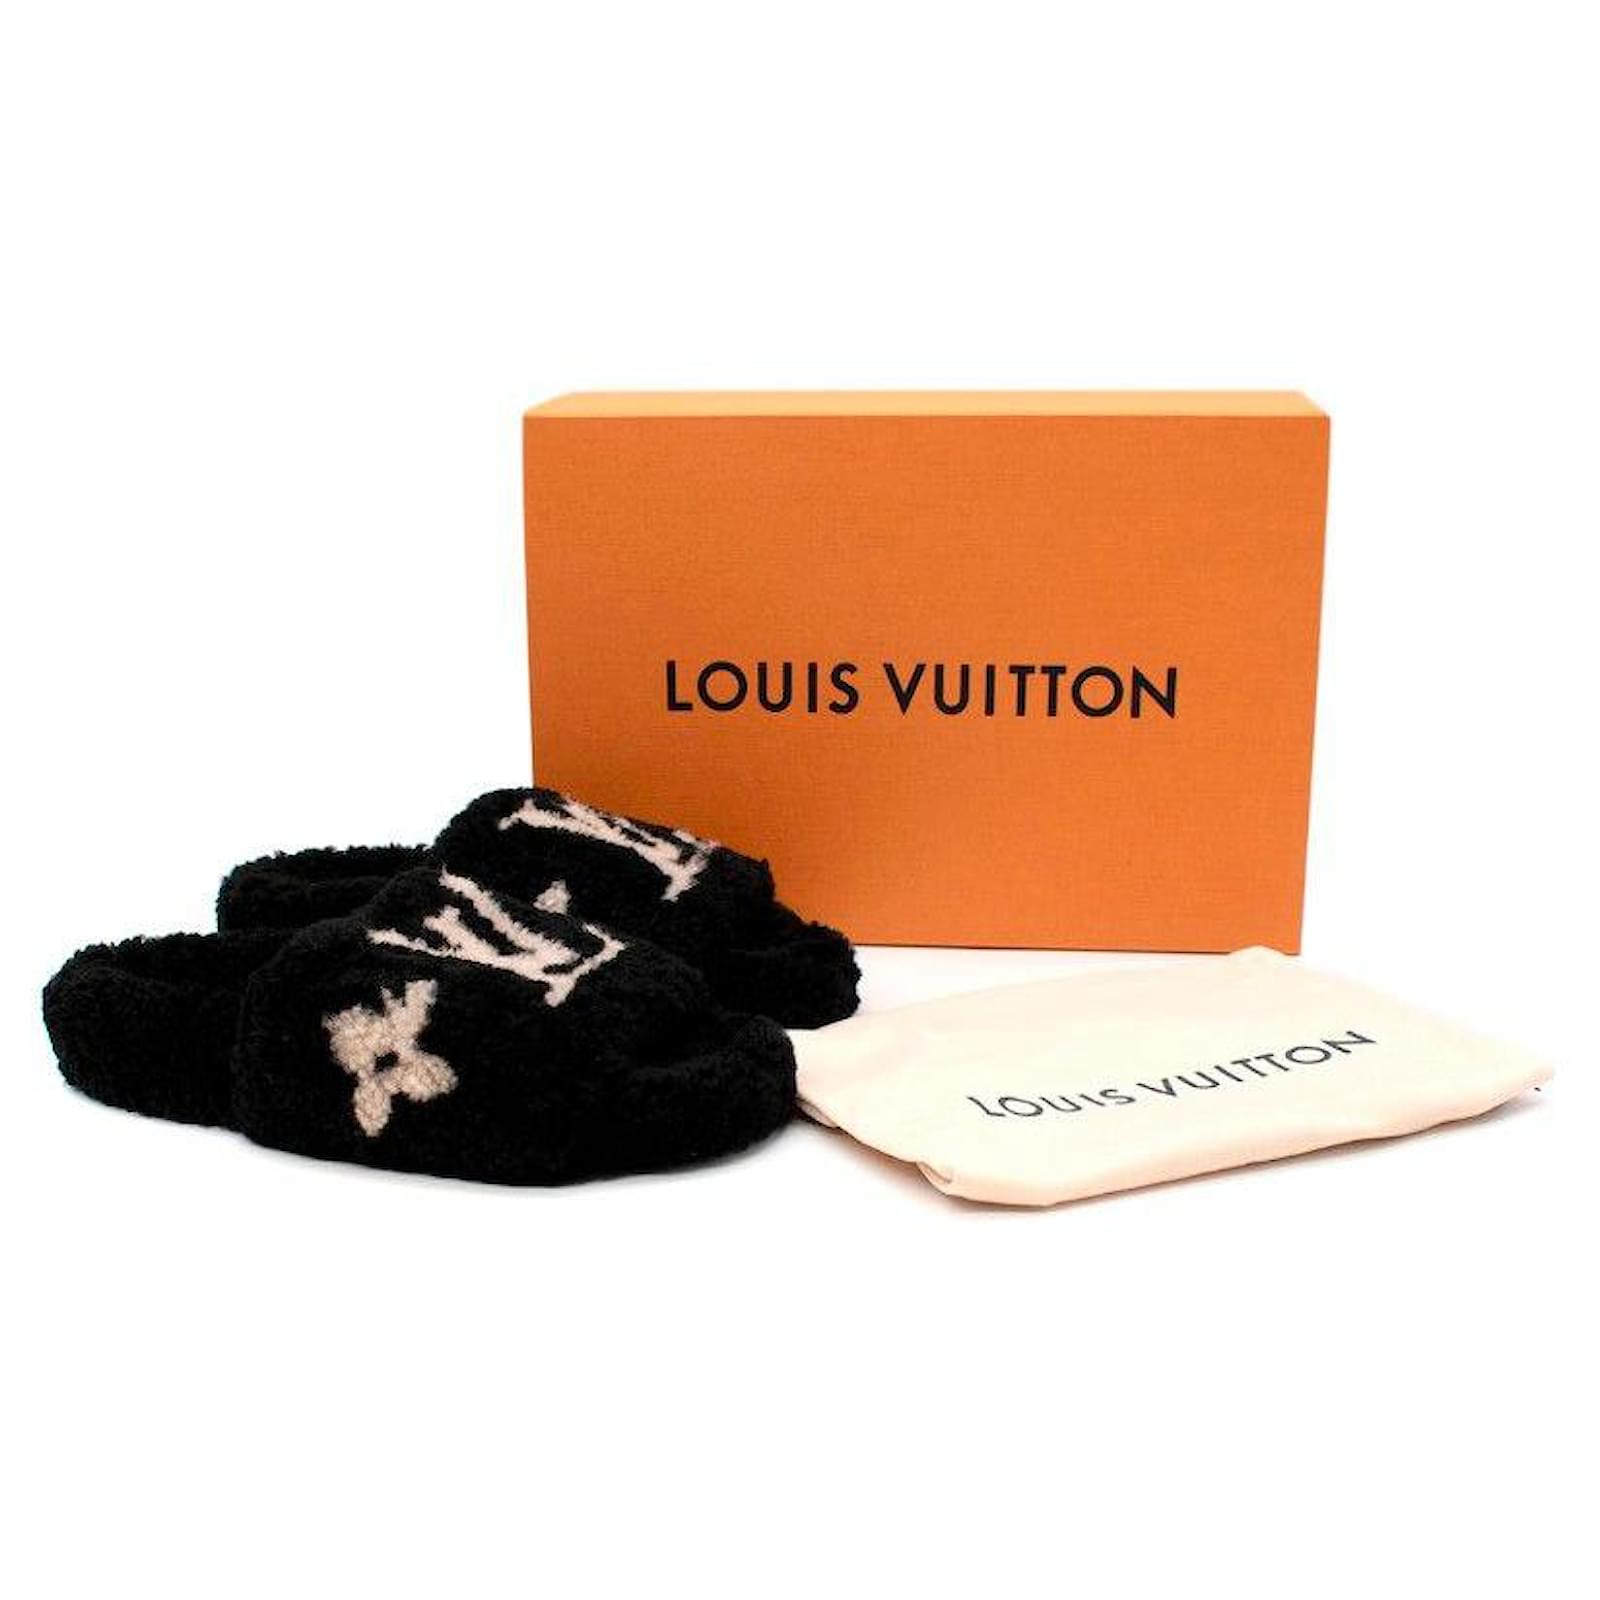 Louis Vuitton Bom Dia Shearling Beige Flat Mules - Sold Out/Rare - Us size  9.5